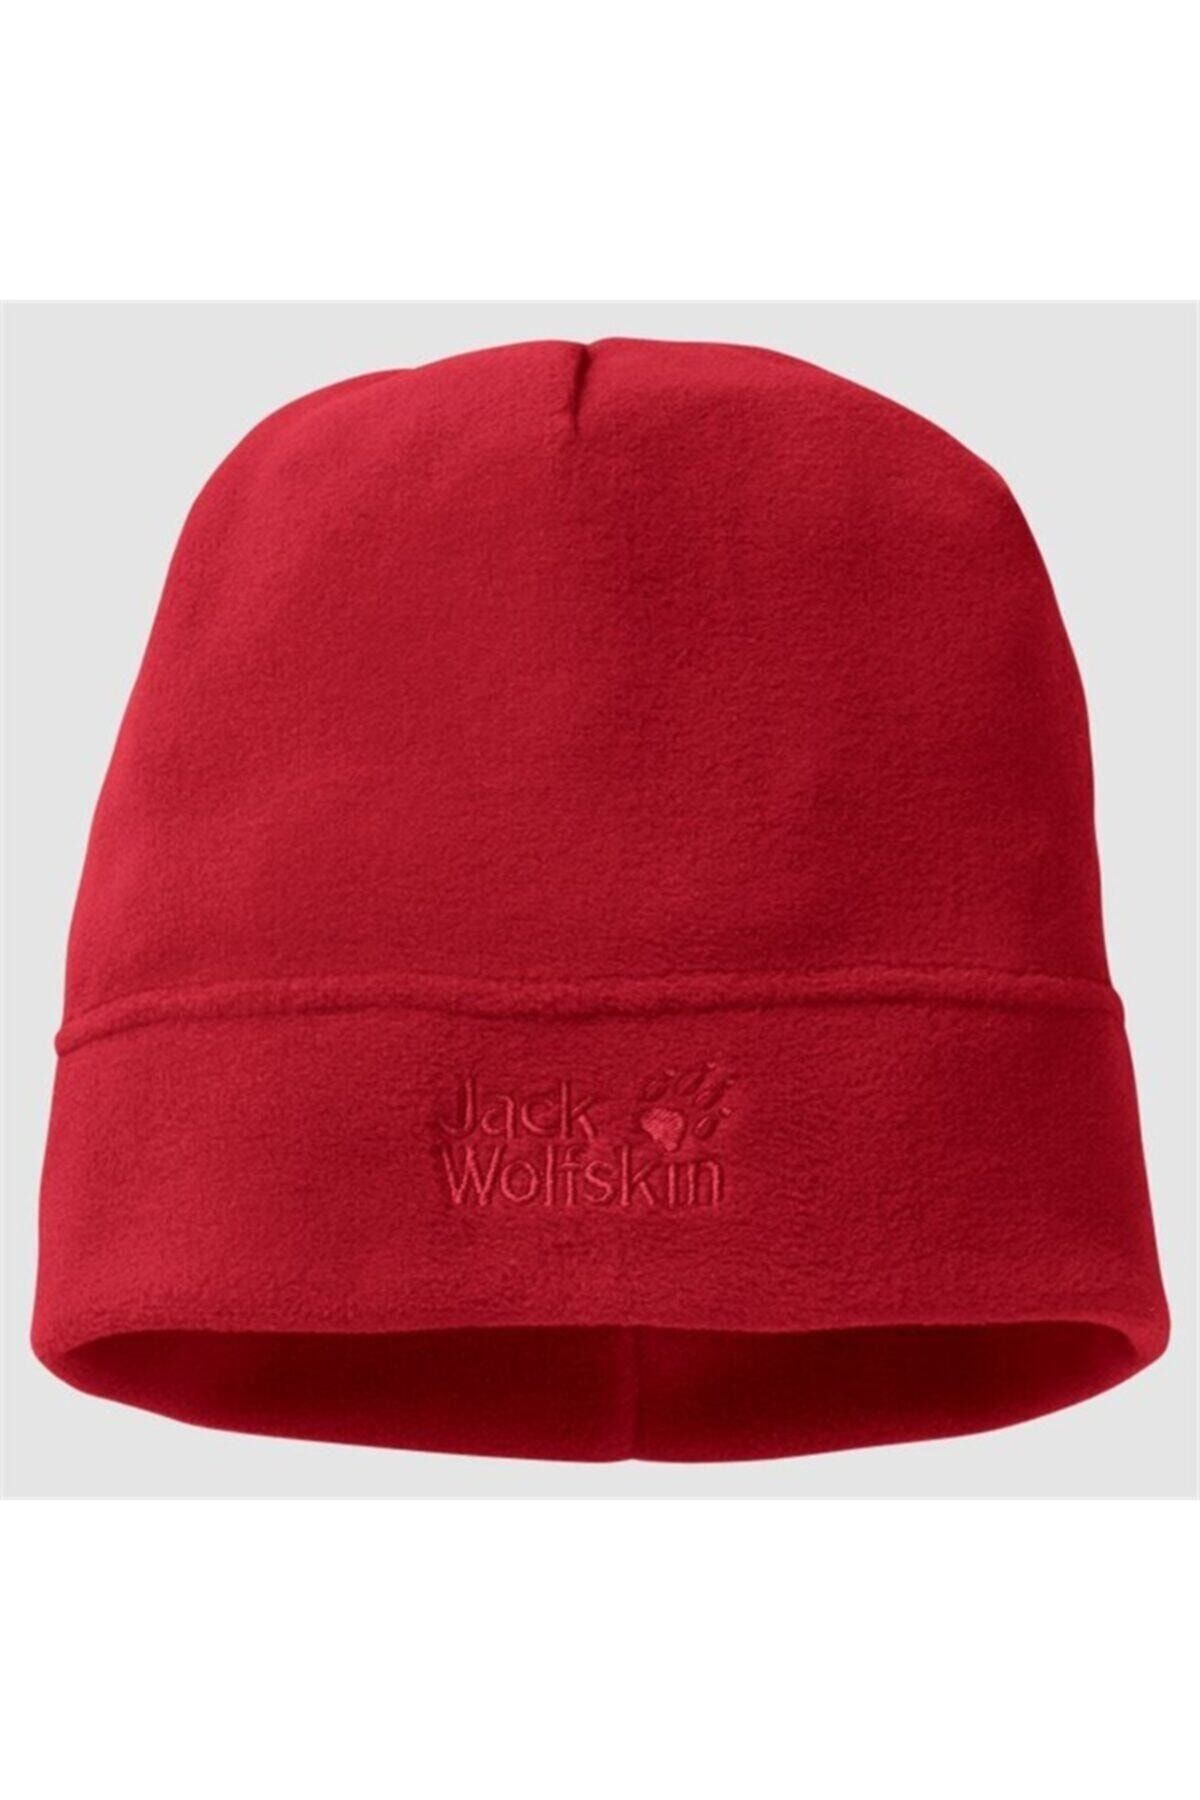 Jack Wolfskin Real Stuff Cap Red Lacquer